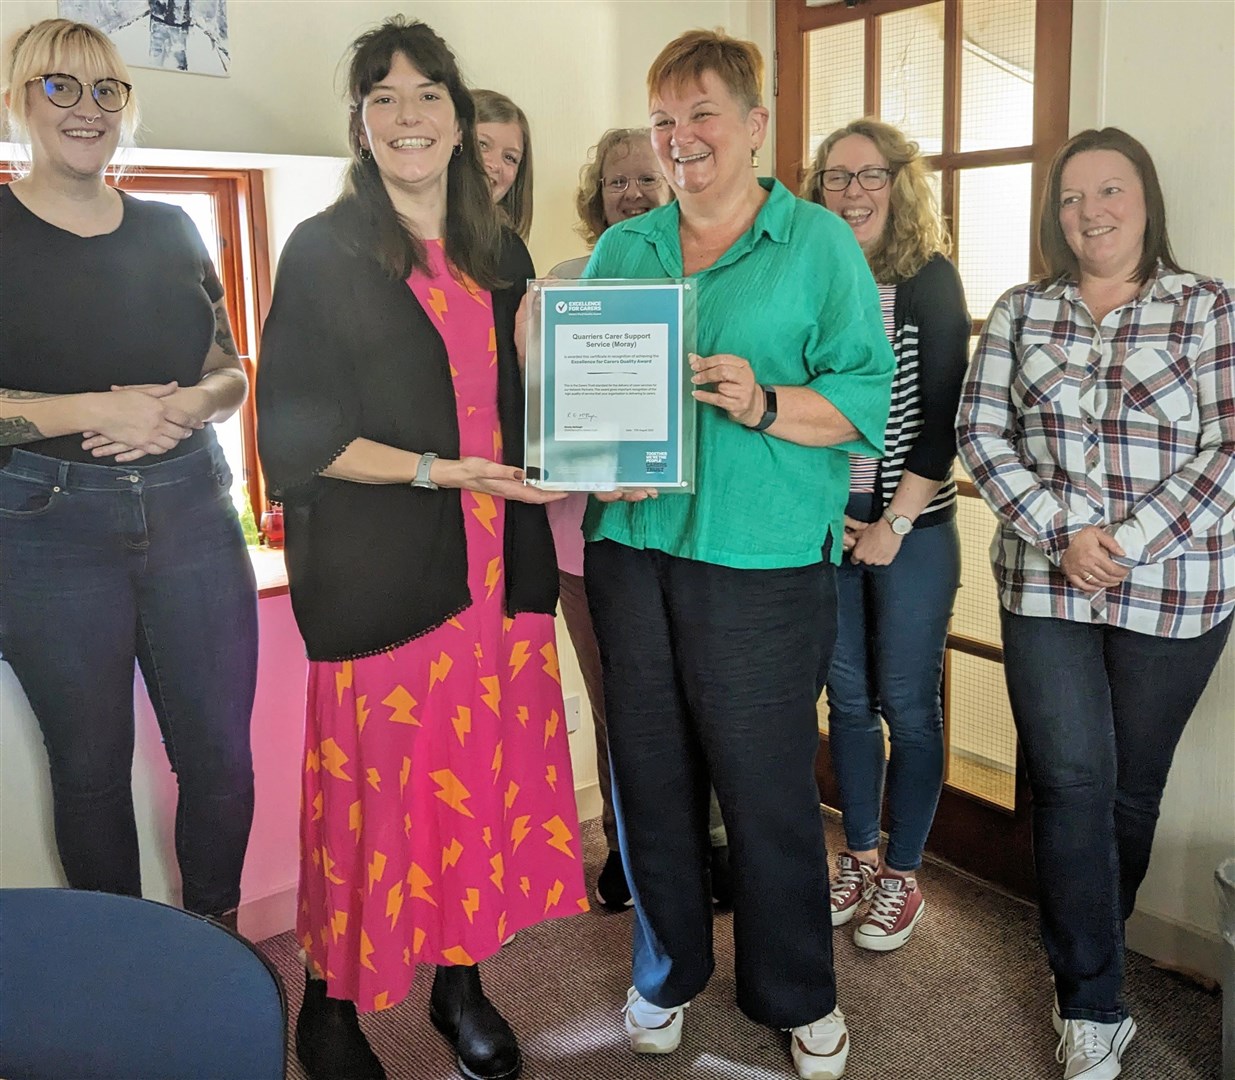 The Moray Carers Support Service team met with Becky Duff; Director of Carers Trust for Scotland to receive their award. Pictured are: Sophie Smith; Becky Duff; Anna Mackay; Fiona Imlach; Sandi Downing; Liza Campbell and Lee-Anne Blaney